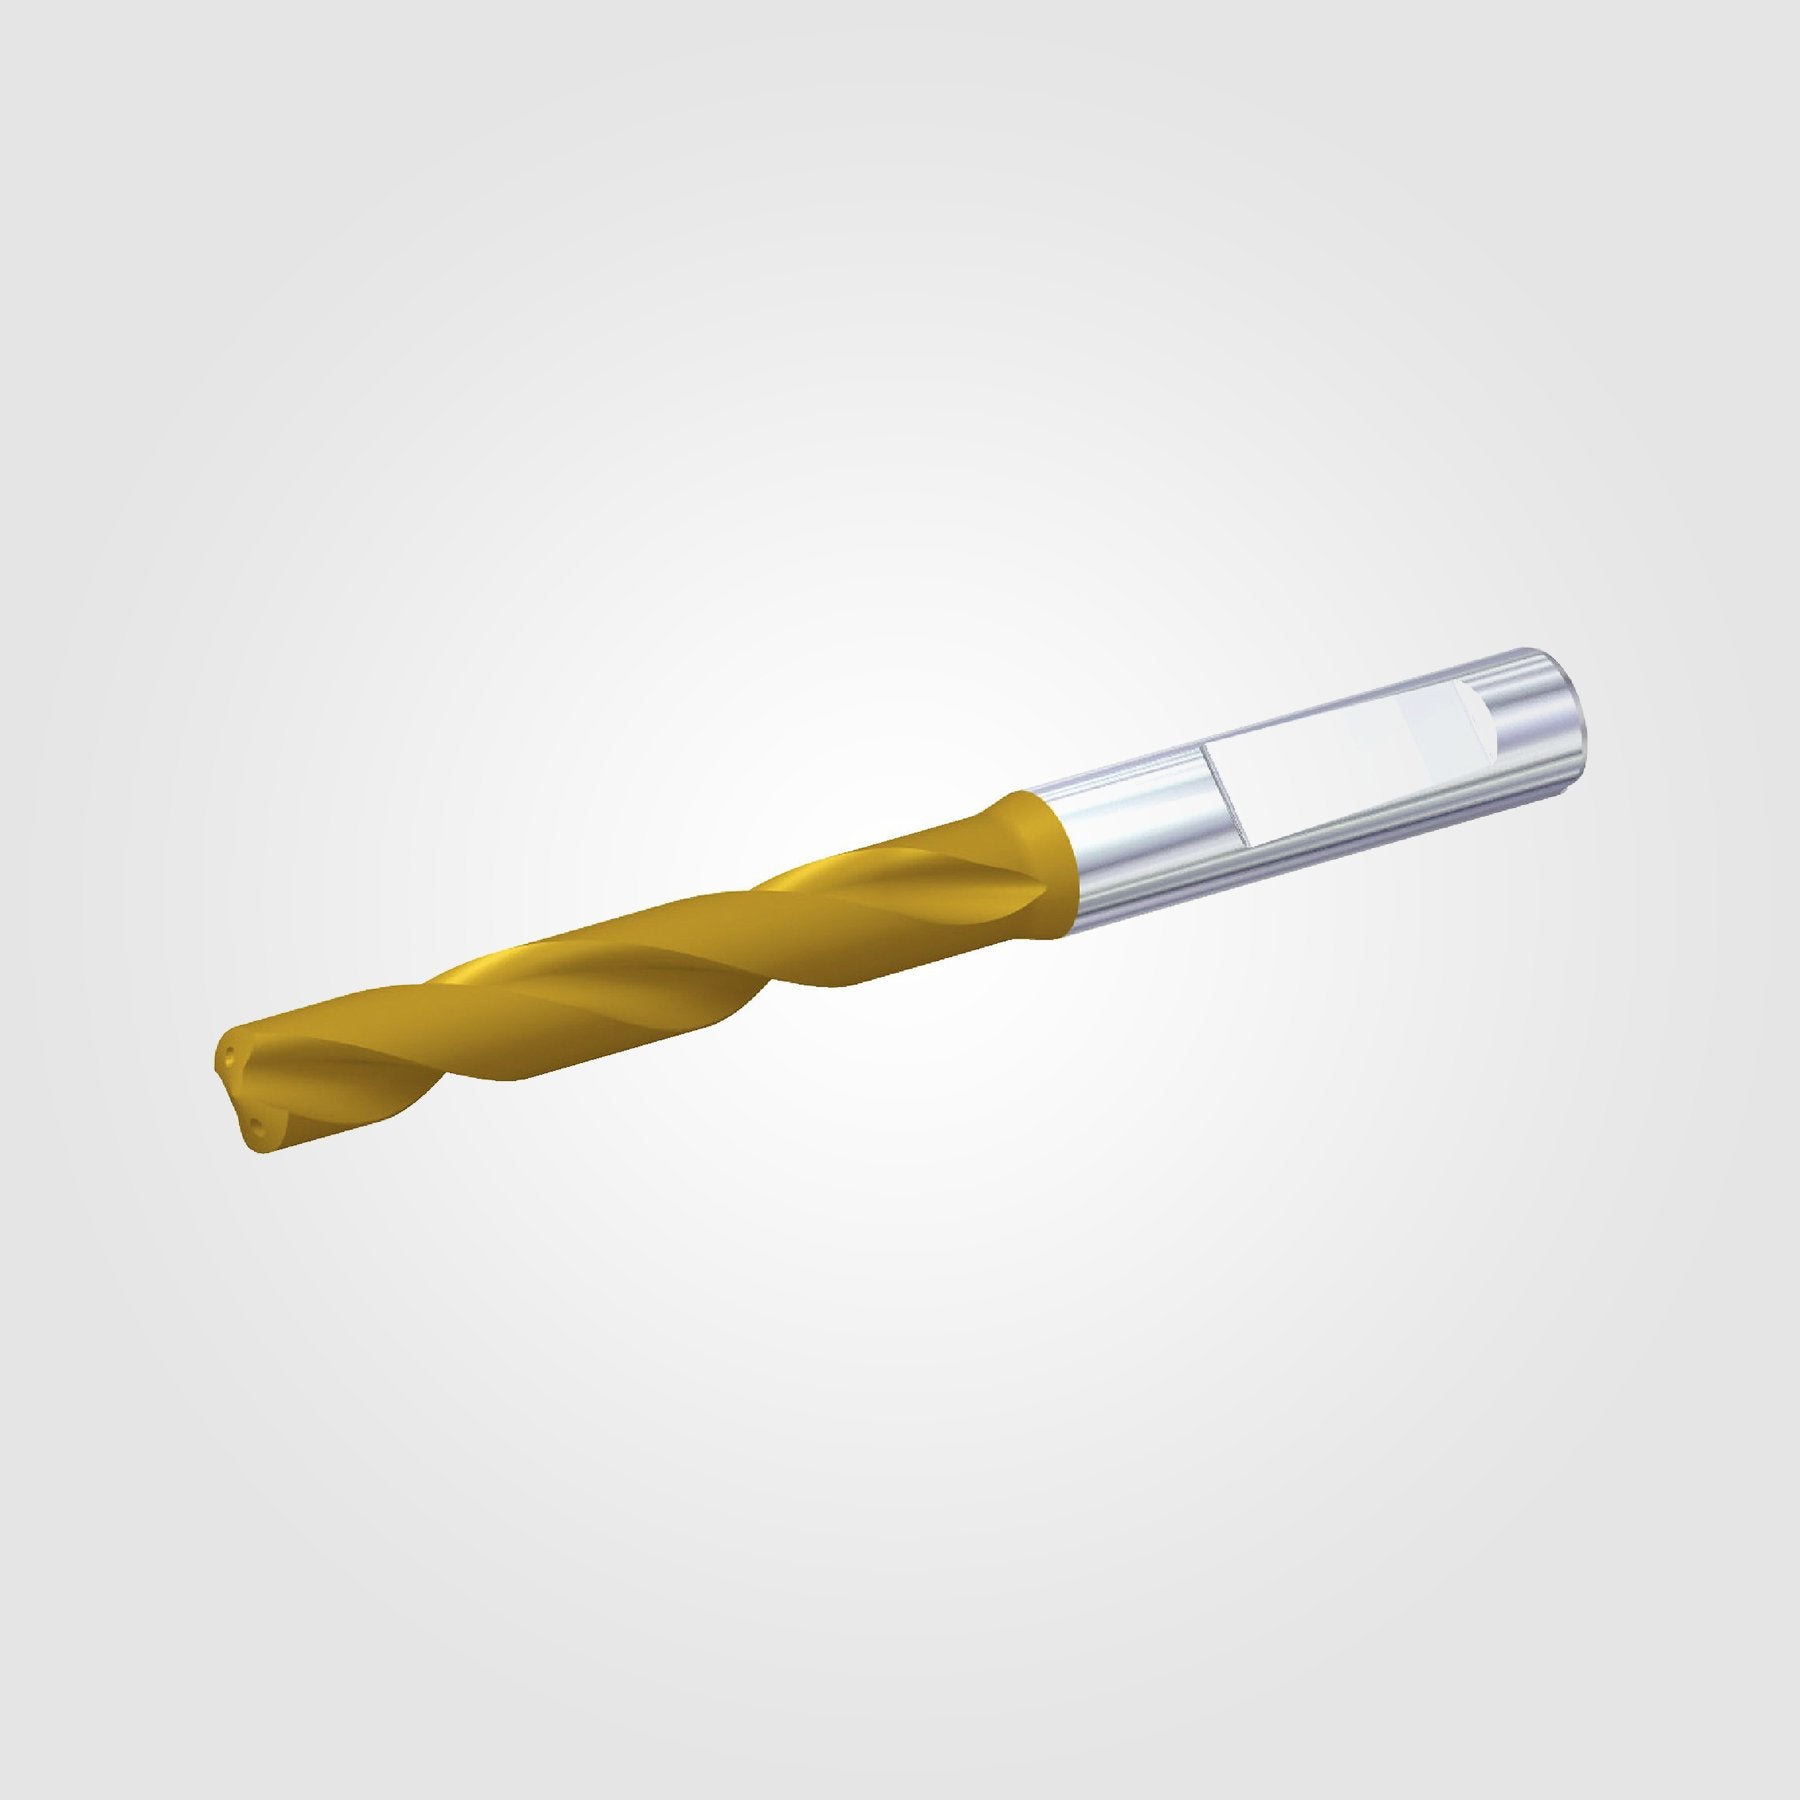 GOdrill (THROUGH COOLANT) | 6.8mm / .2677" / 3xD | SOLID CARBIDE DRILL | 4148947